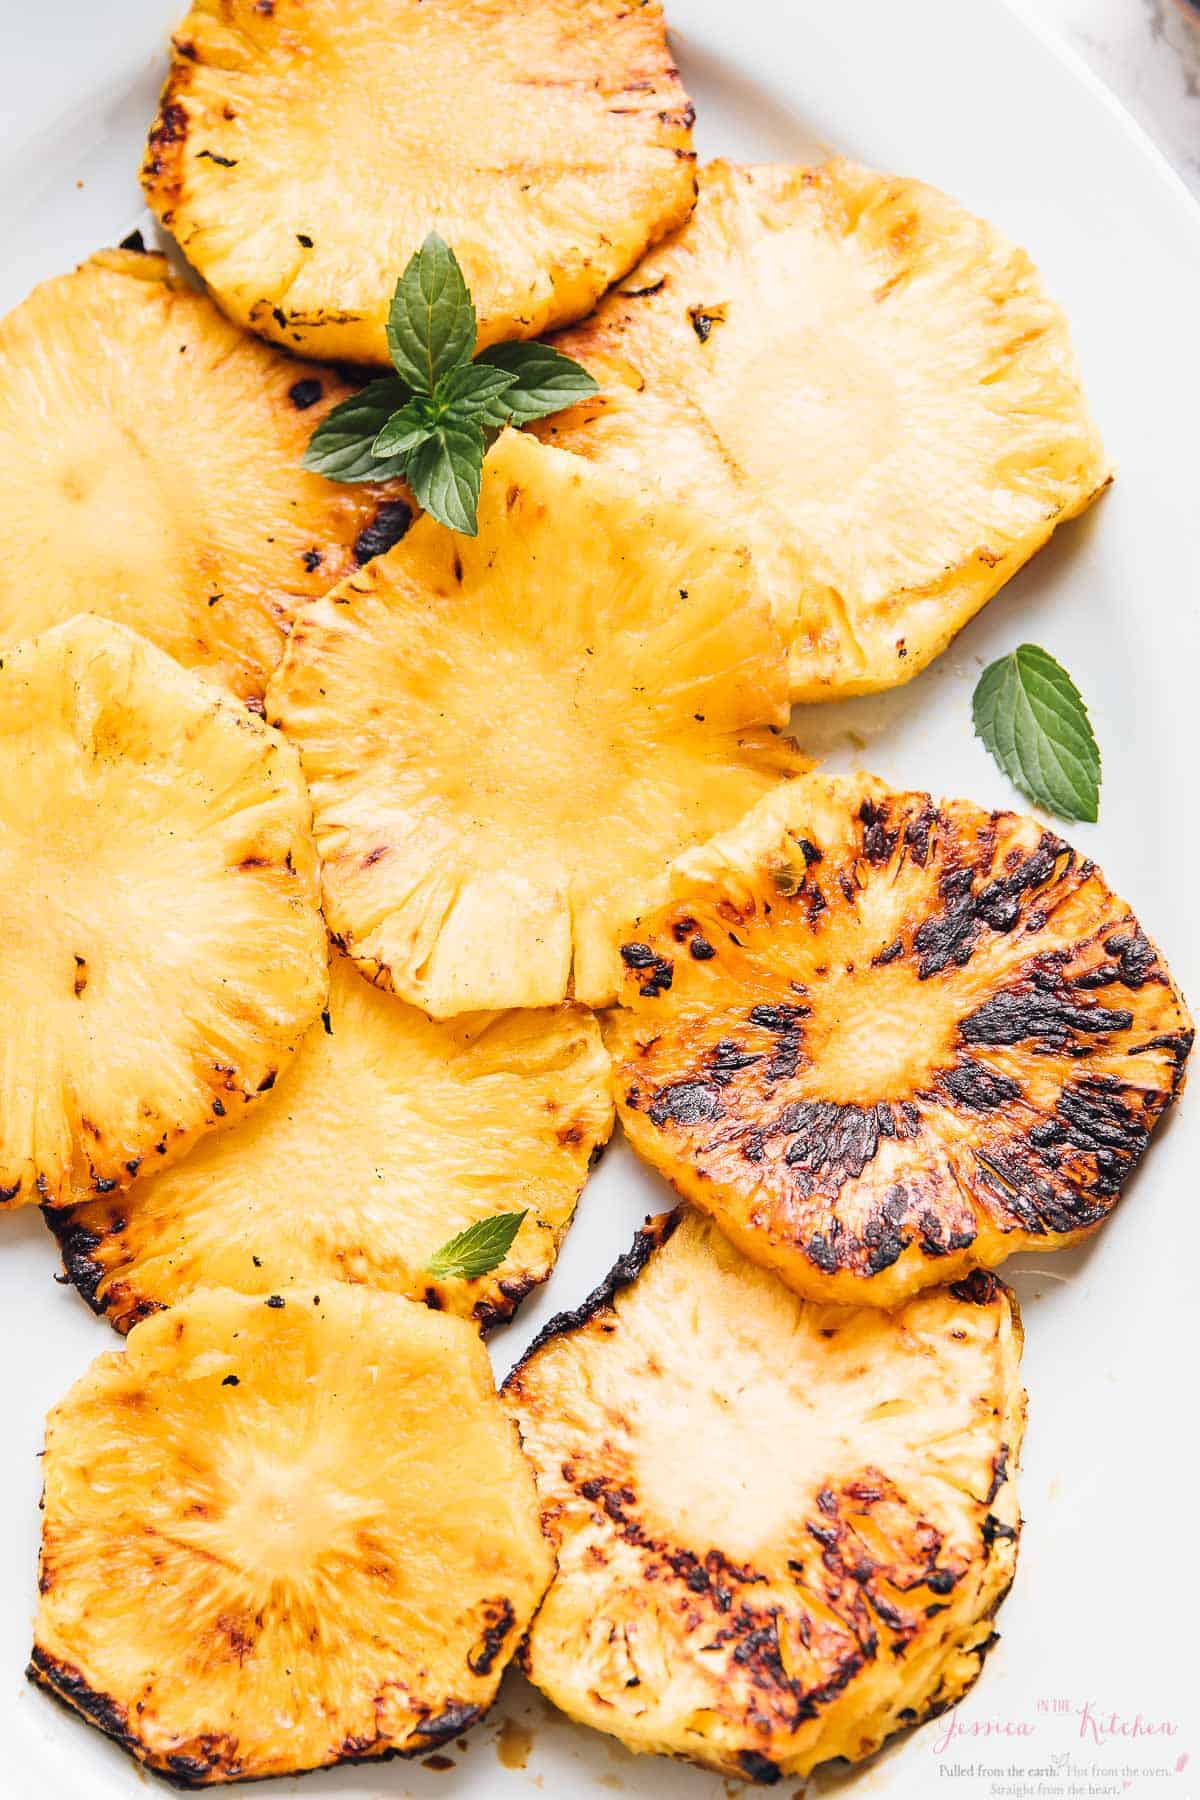 Top down shot of grilled pineapples on a white dish.